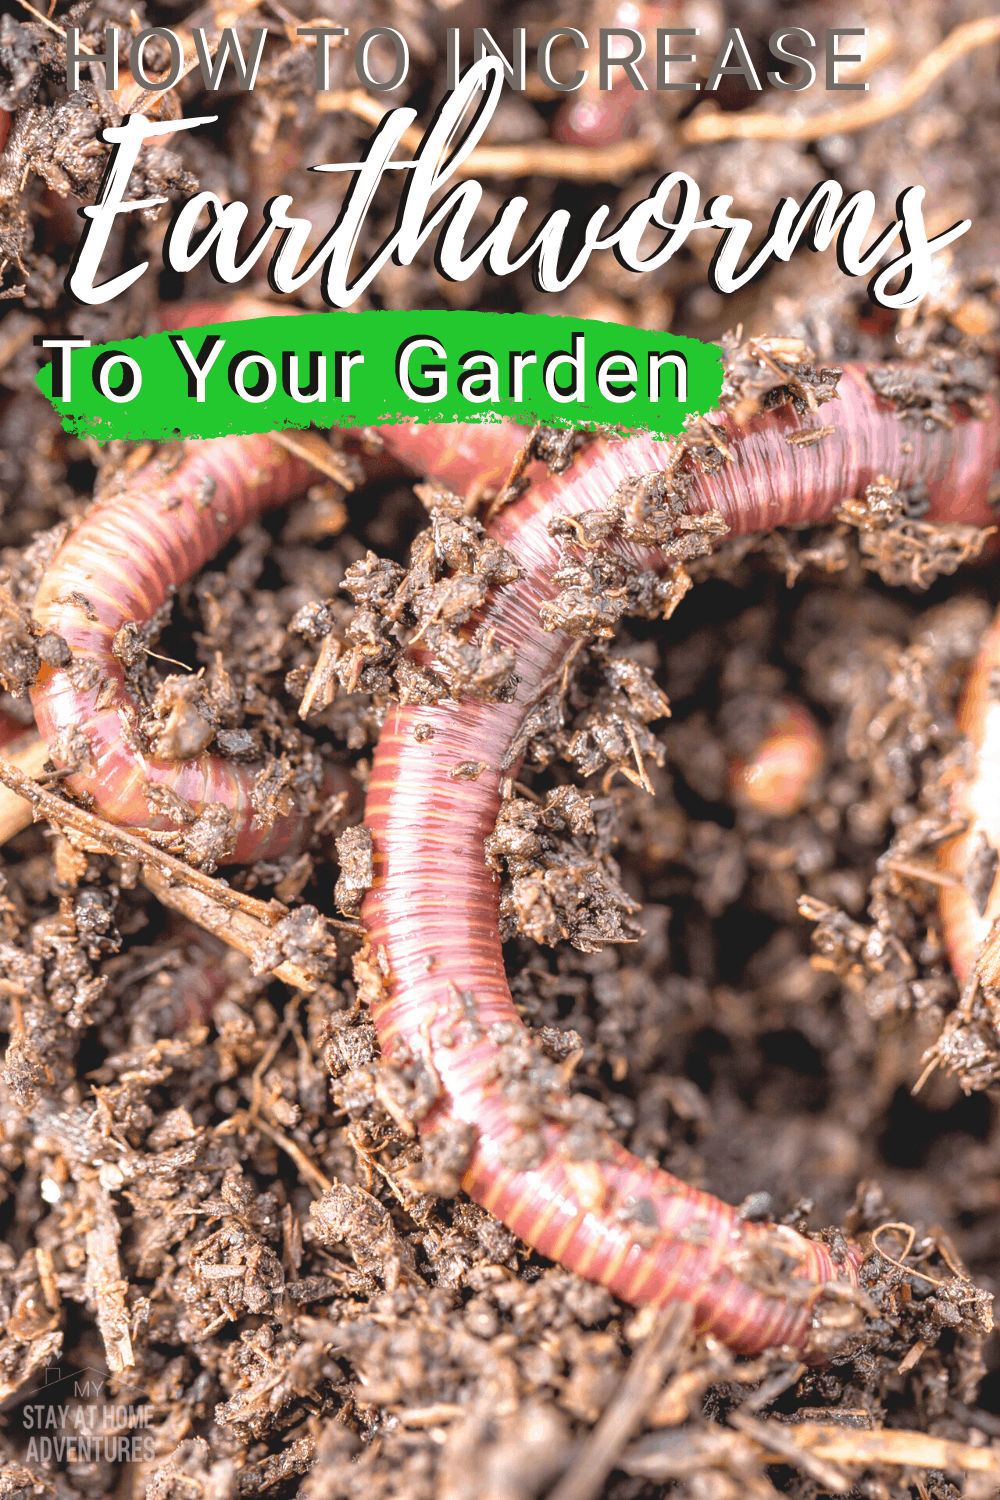 Learn five ways to attract earthworms to your home garden from learning the benefits of having worms to where to find them for your garden. #garden #gardening #earthworms #organicgarden via @mystayathome